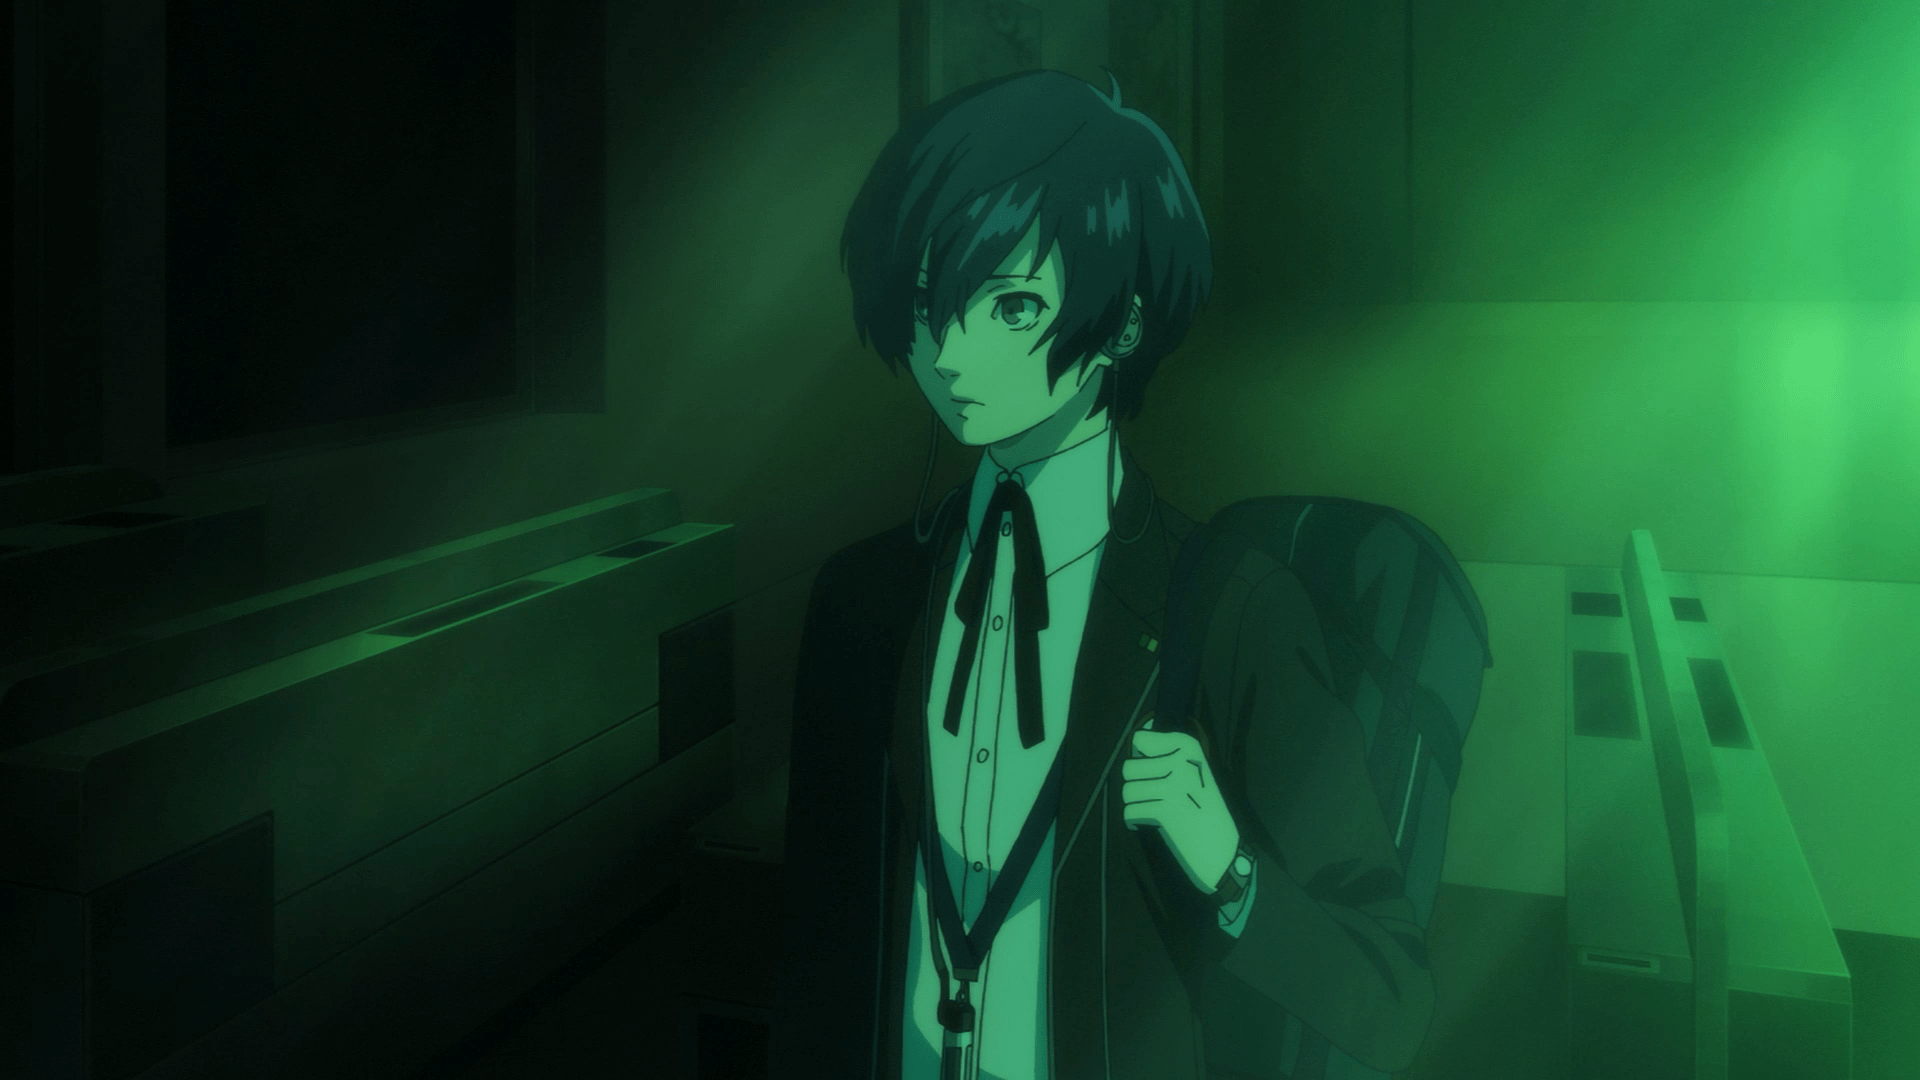 Persona 3 Reload introduces game-changing series mechanic